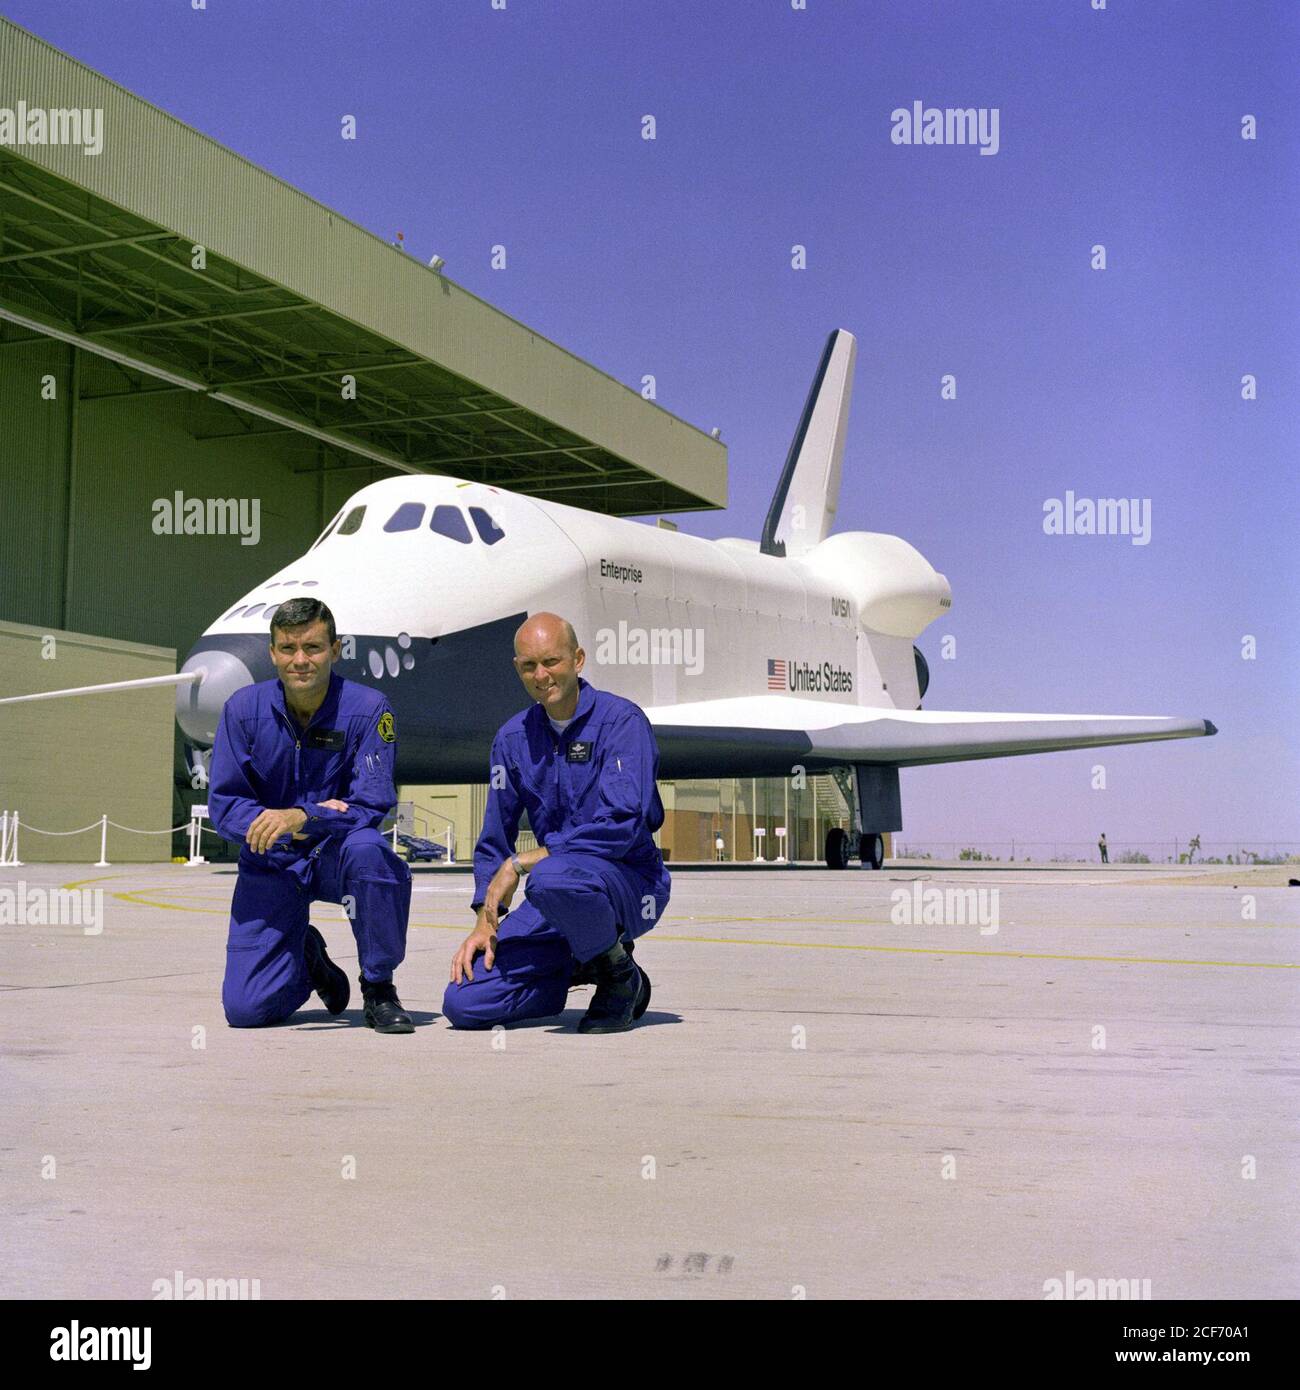 The first crew members for the Space Shuttle Approach and Landing Tests (ALT) are photographed at the Rockwell International Space Division's Orbiter Assembly Facility at Palmdale, California. The Shuttle Enterprise is Commanded by former Apollo 13 Lunar Module pilot, Fred Haise (left) with C. Gordon Fullerton as pilot. The Shuttle Orbiter Enterprise was named after the fictional Starship Enterprise from the popular 1960's television series, Star Trek. Stock Photo